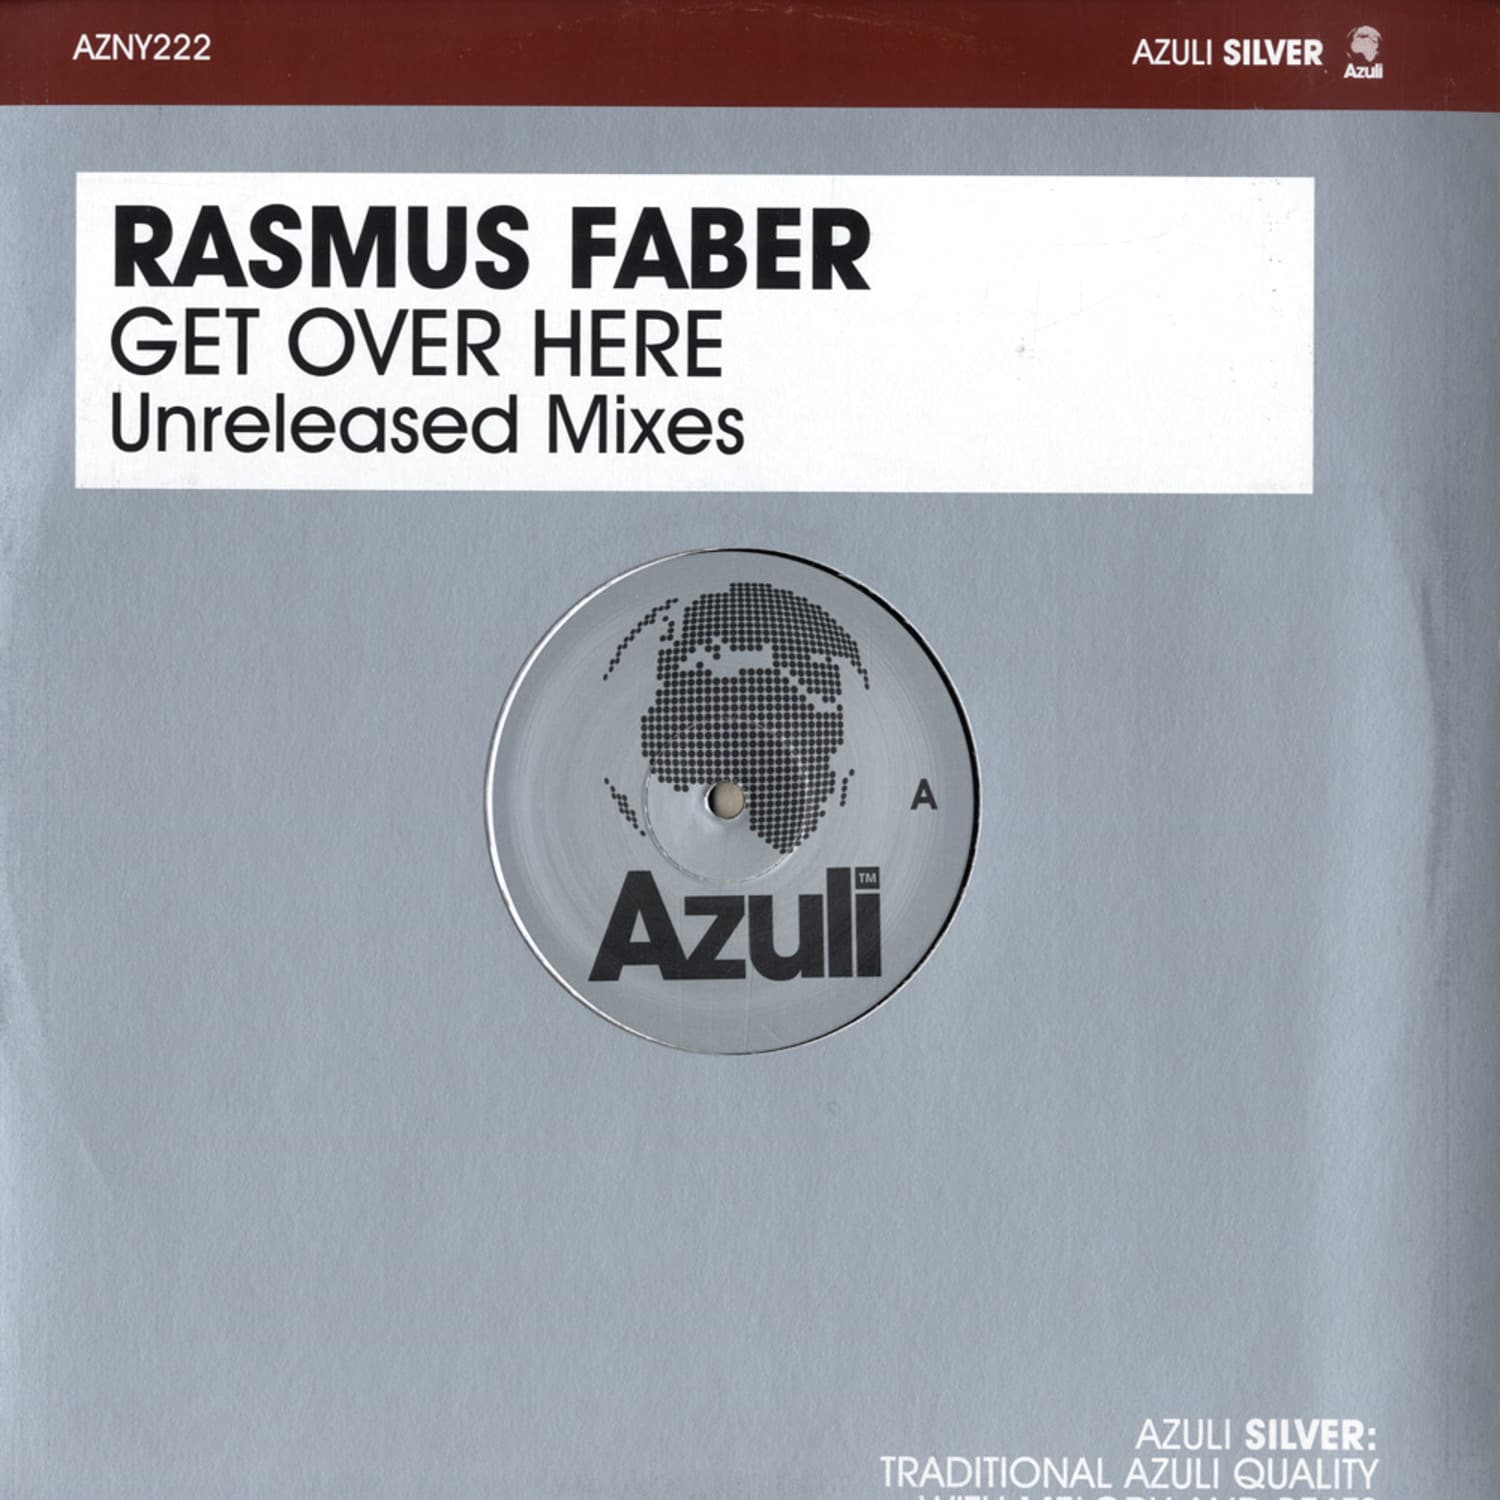 Rasmus Faber - GET OVER HERE